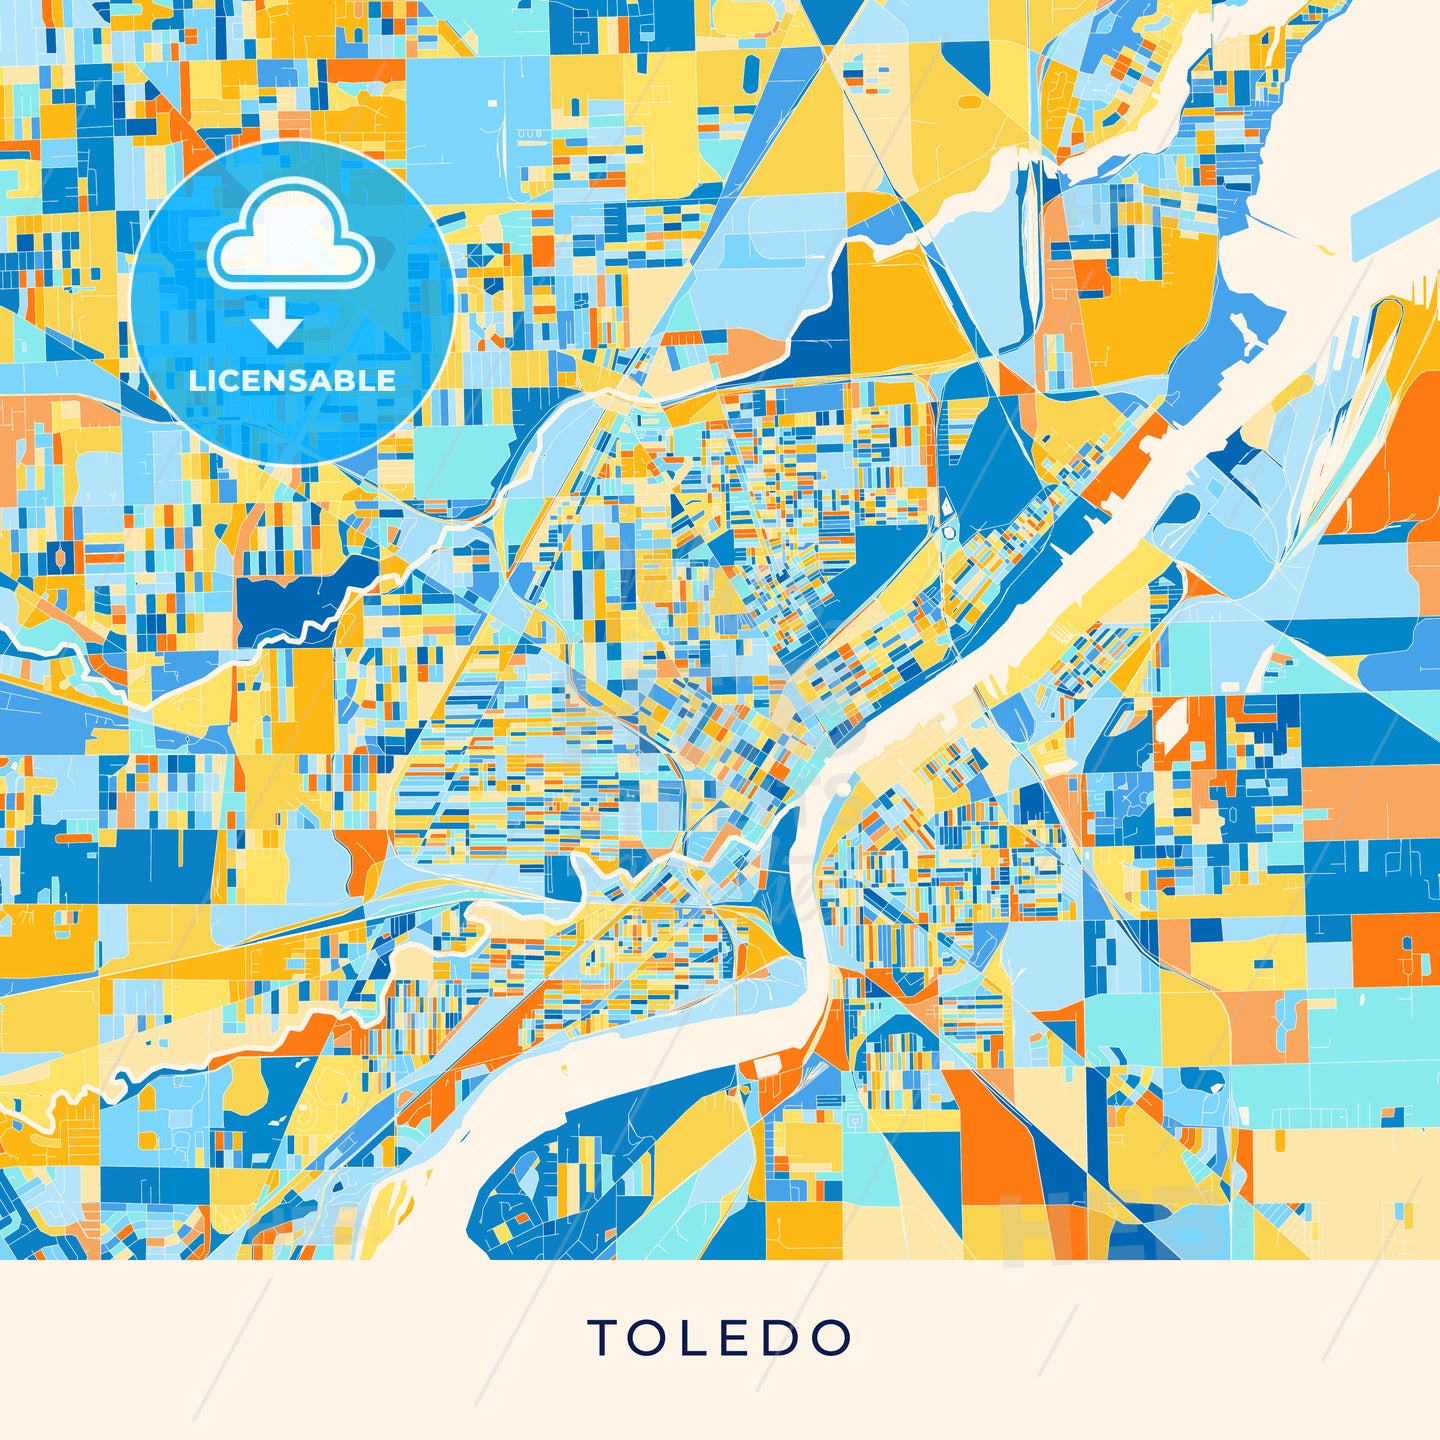 Toledo colorful map poster template